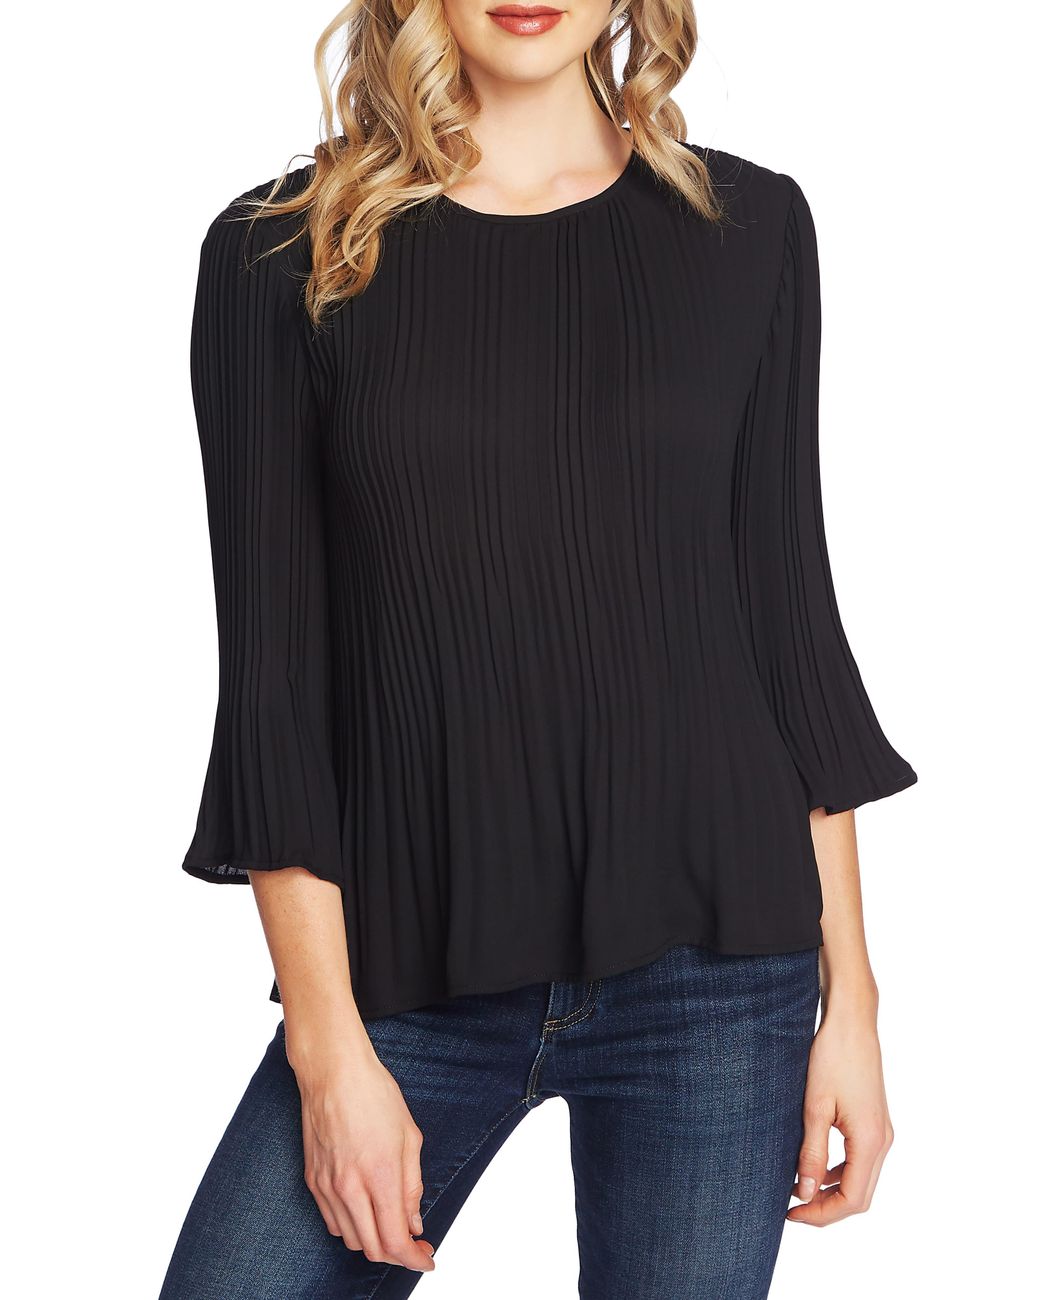 Cece Pleated Swing Top in Black - Save 34% - Lyst